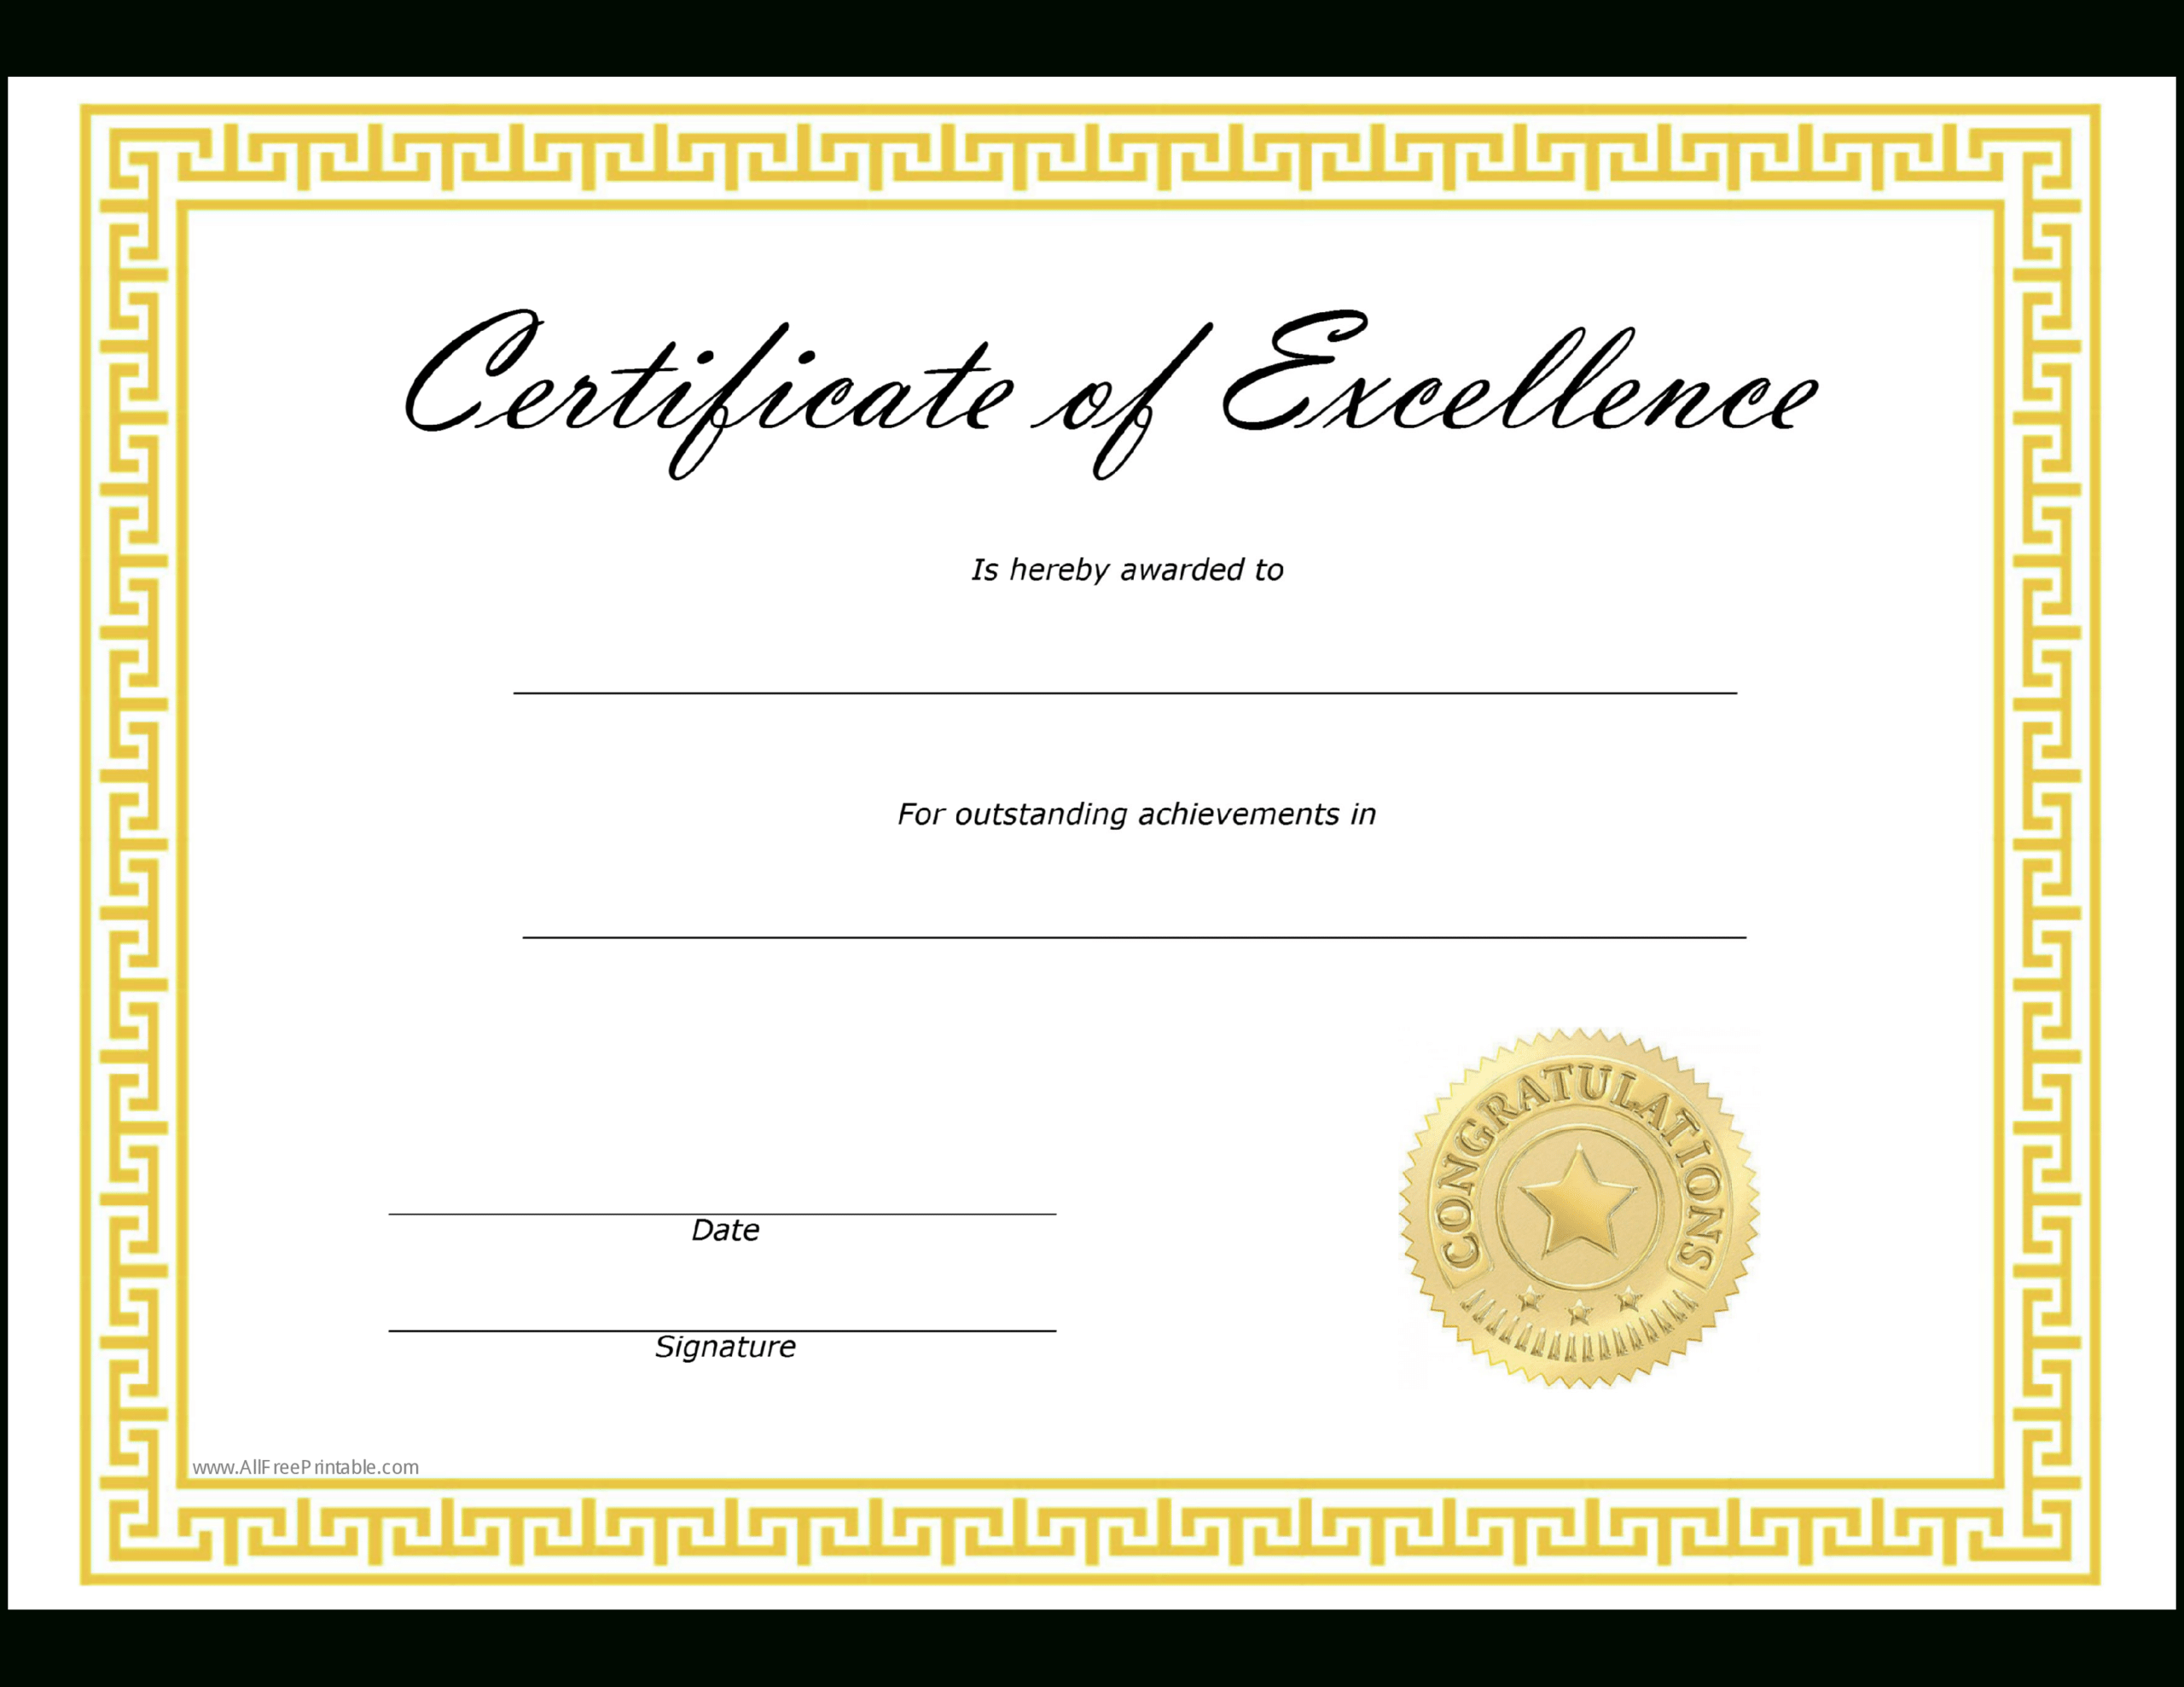 Certificates Of Excellence Templates - Beyti.refinedtraveler.co Within Free Certificate Of Excellence Template